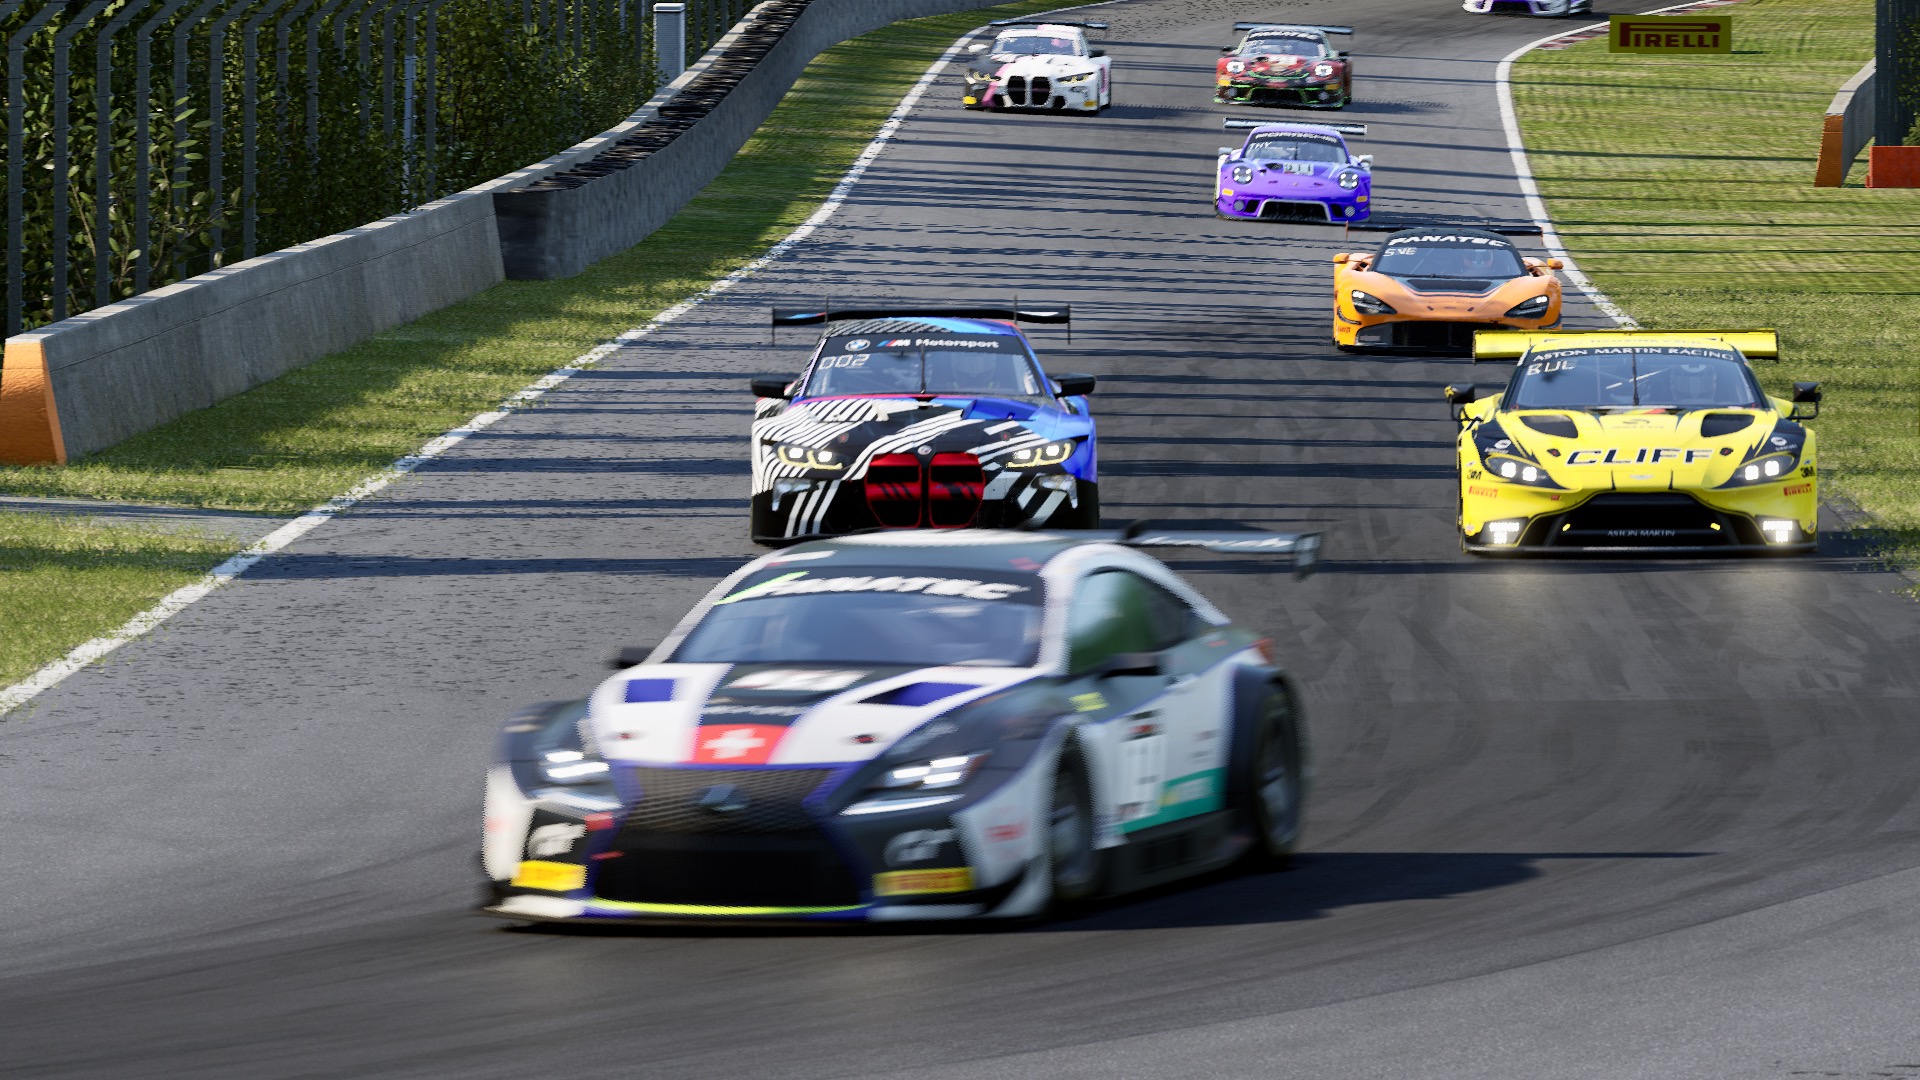 Fifth and final round of our Sprint Cup Season 5 on the circuit of Zolder